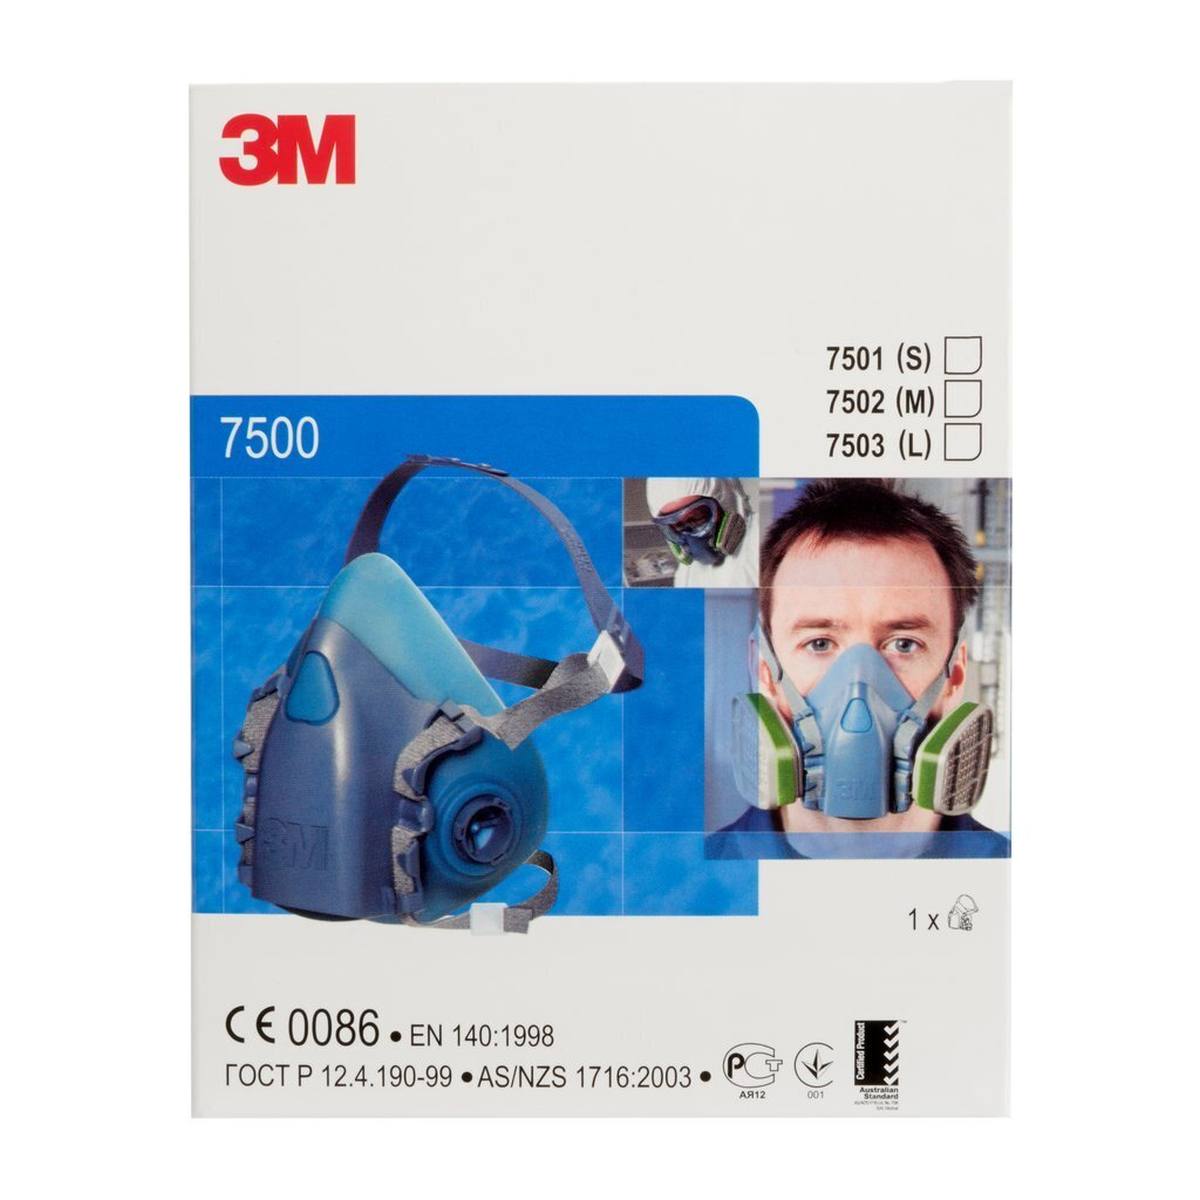 3M 7501S Half mask body silicone / thermoplastic polyester size S